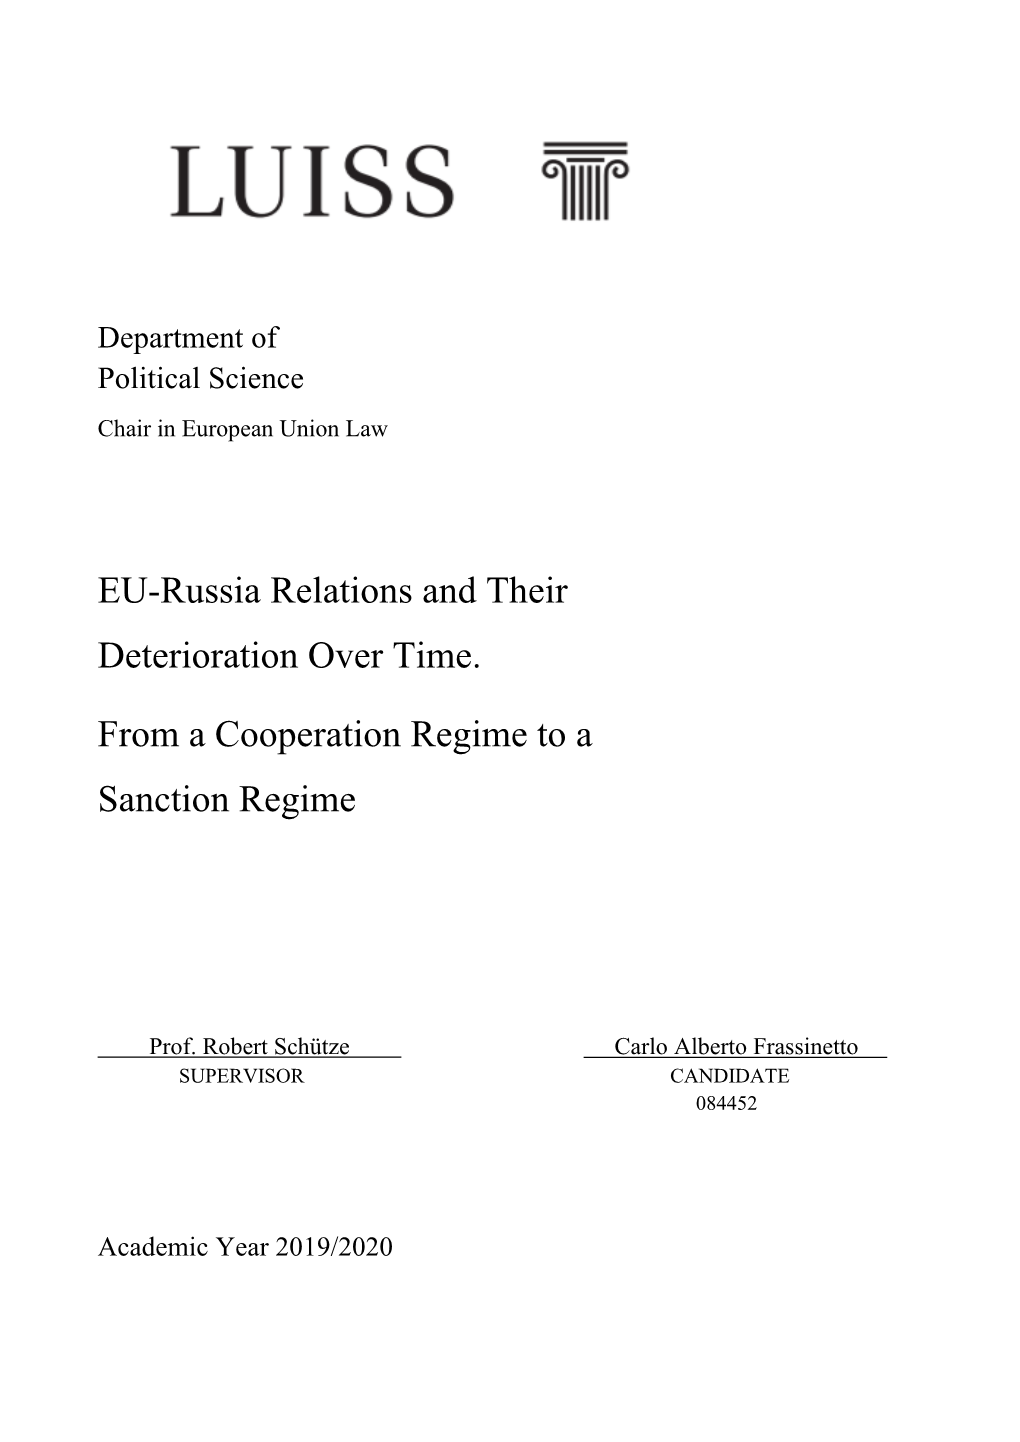 EU-Russia Relations and Their Deterioration Over Time. from a Cooperation Regime to a Sanction Regime